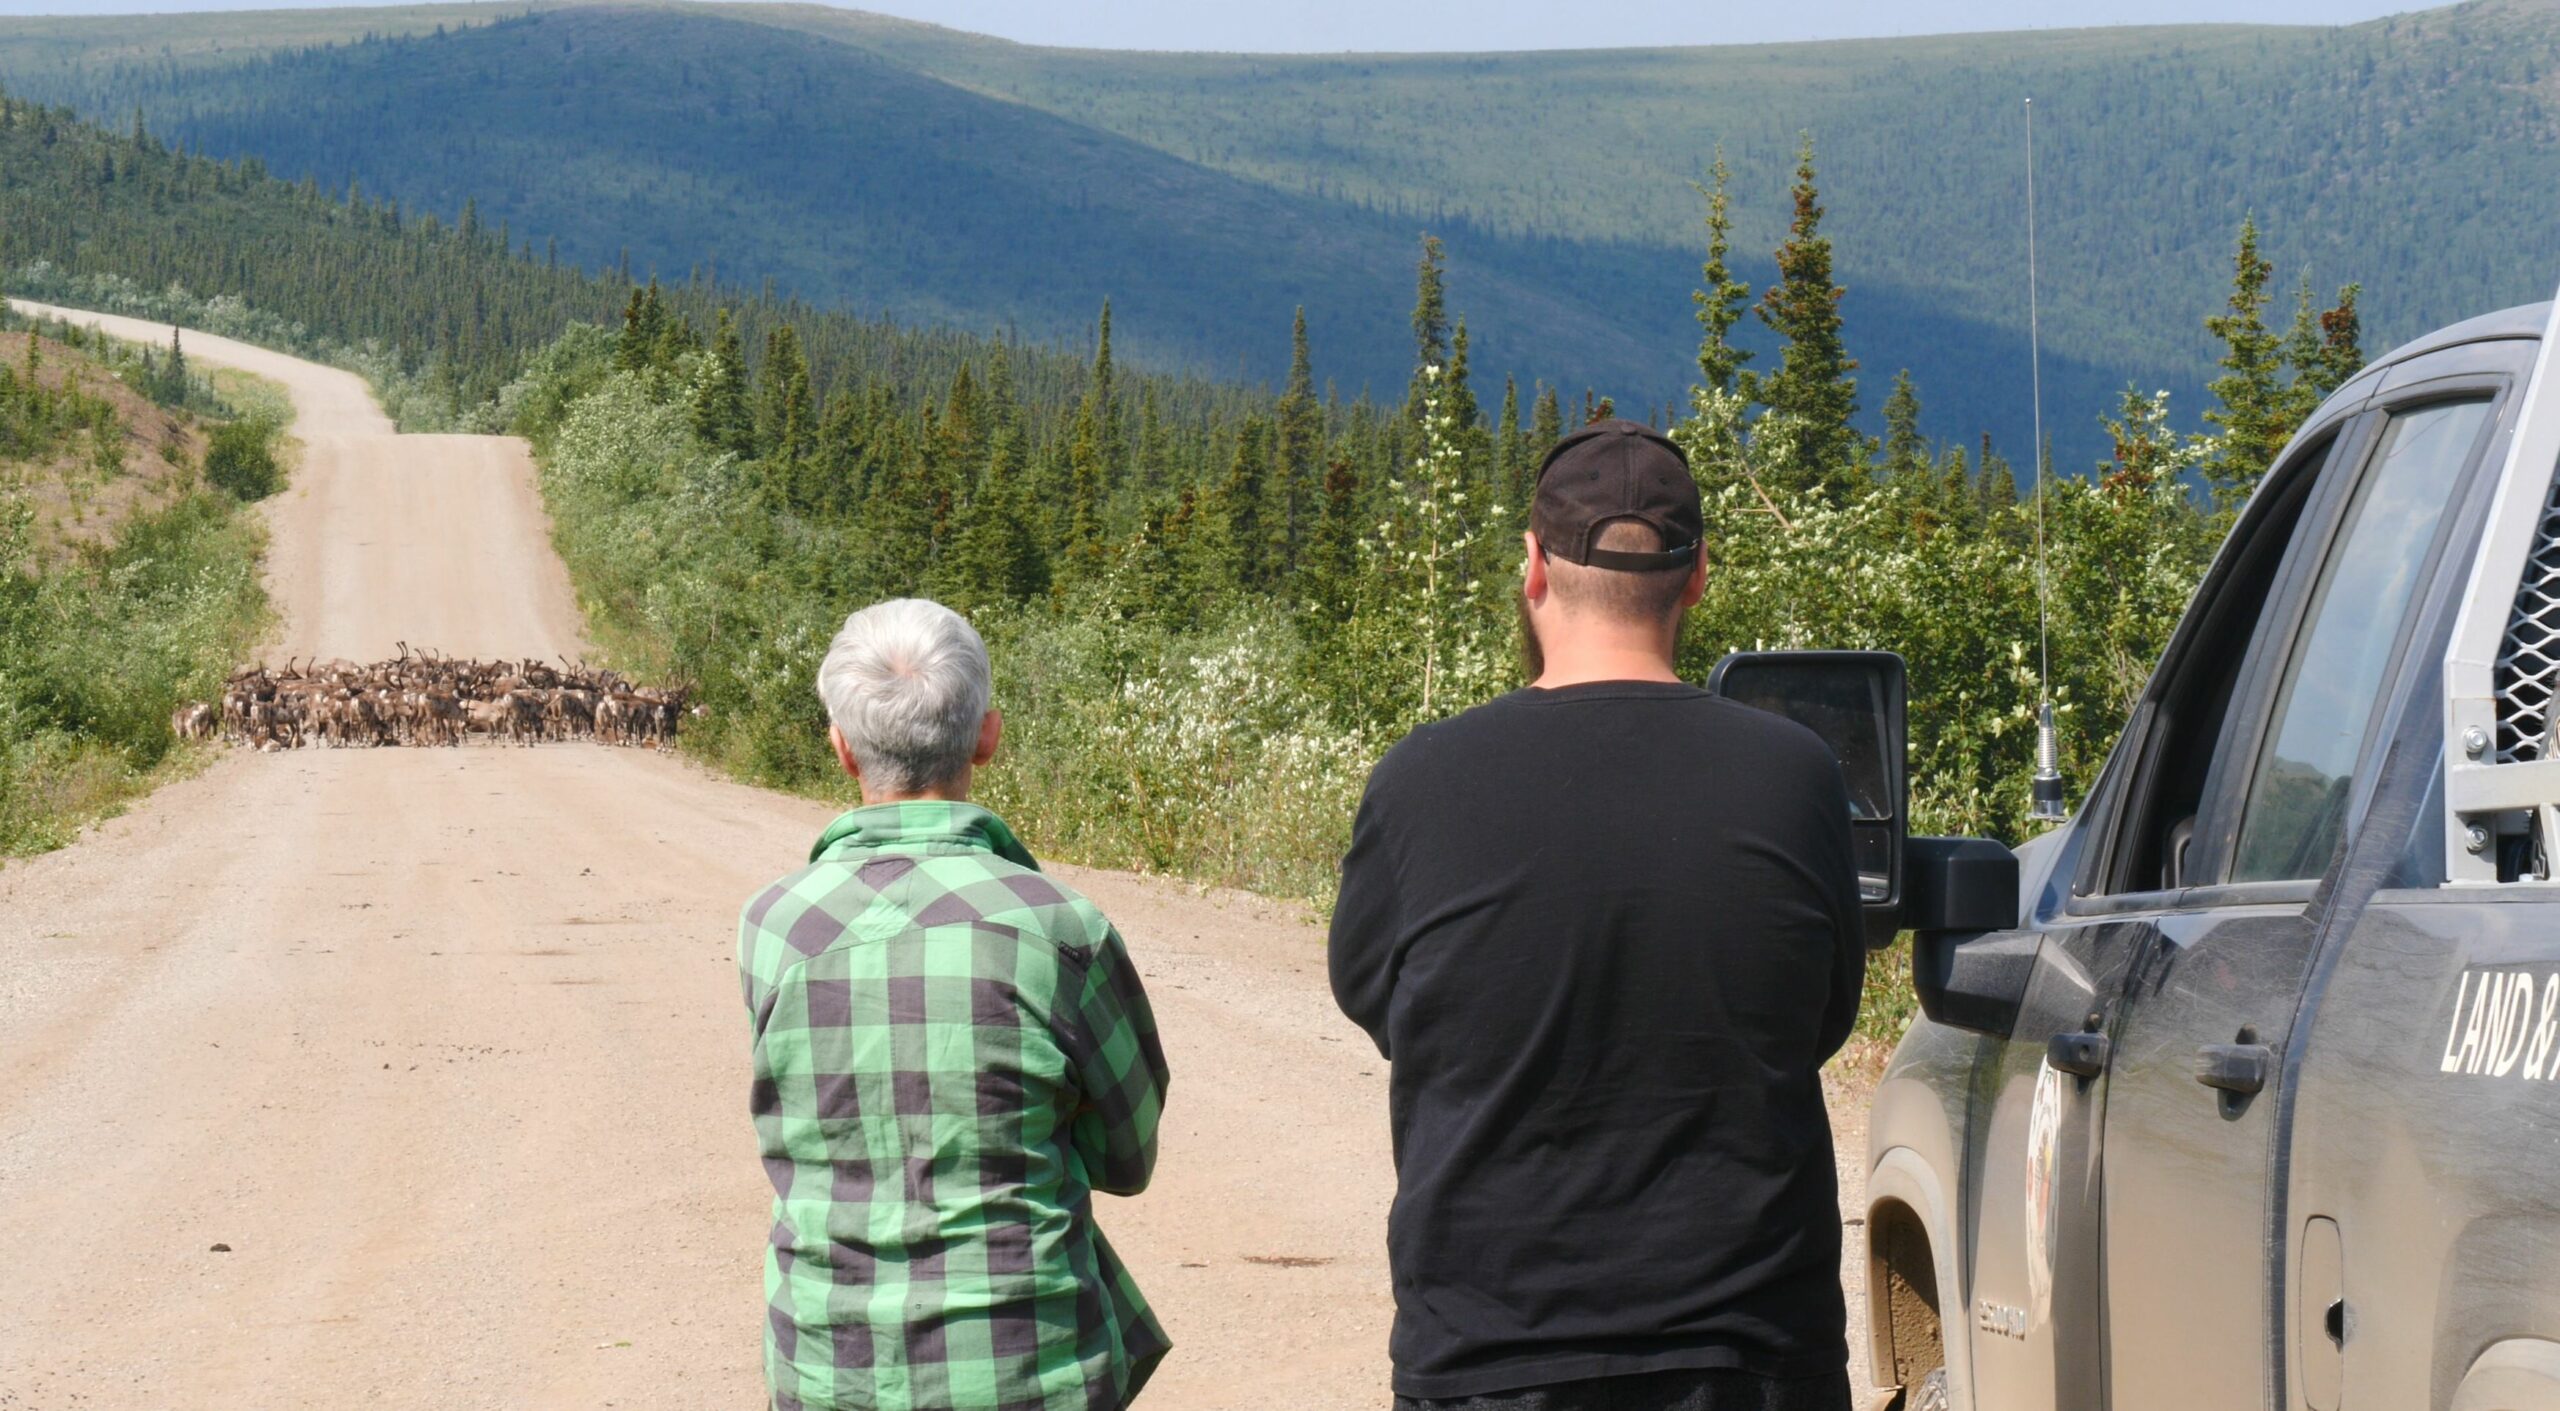 Travelling in the Yukon? Be a respectful guest